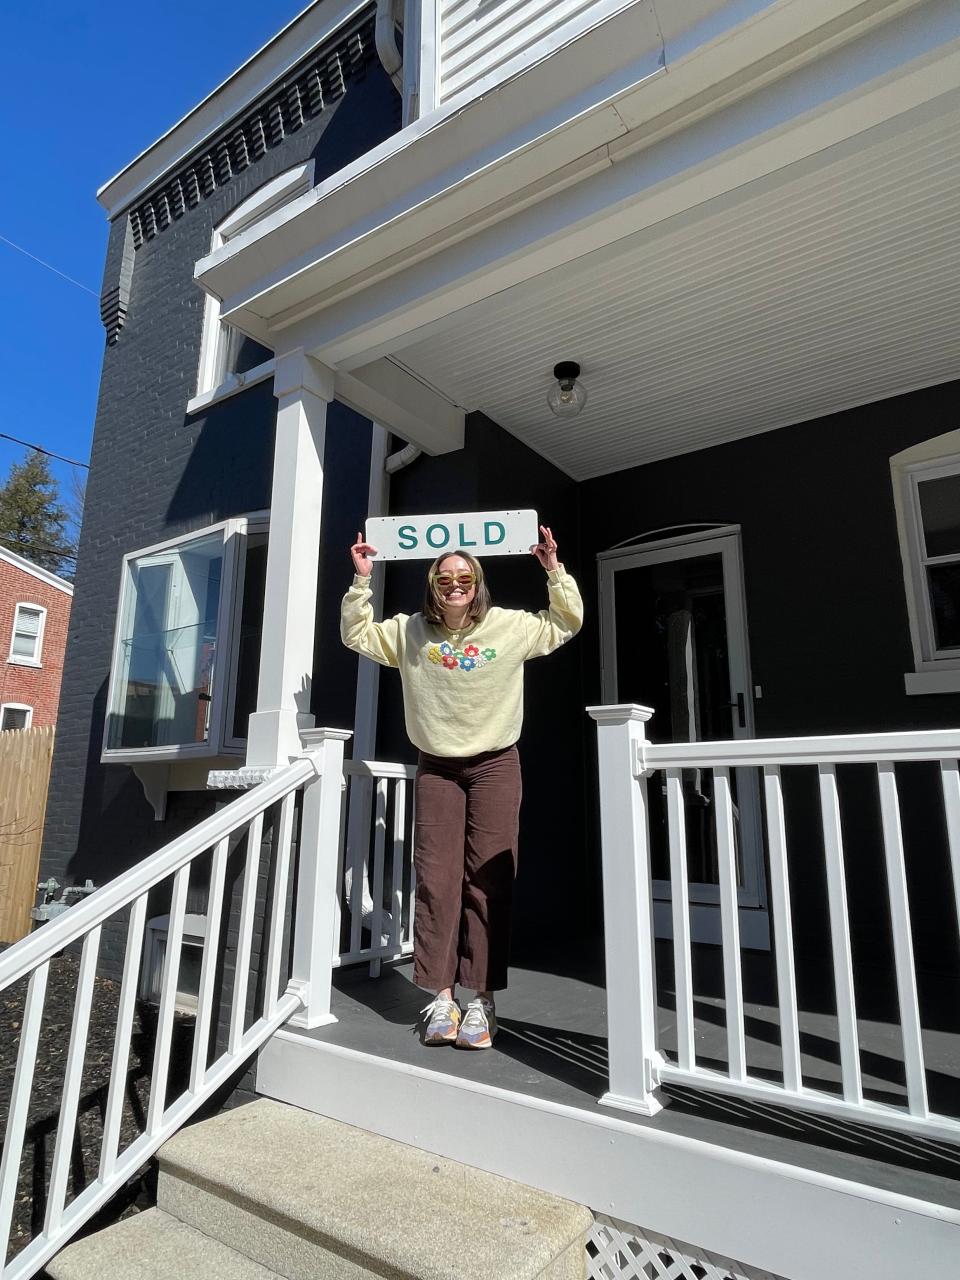 Wilmington's Alyssa Tarantino celebrates the purchase of her first home, located in the city's Triangle neighborhood. Tarantino's search for a home was featured on HGTV's "House Hunters" last week.